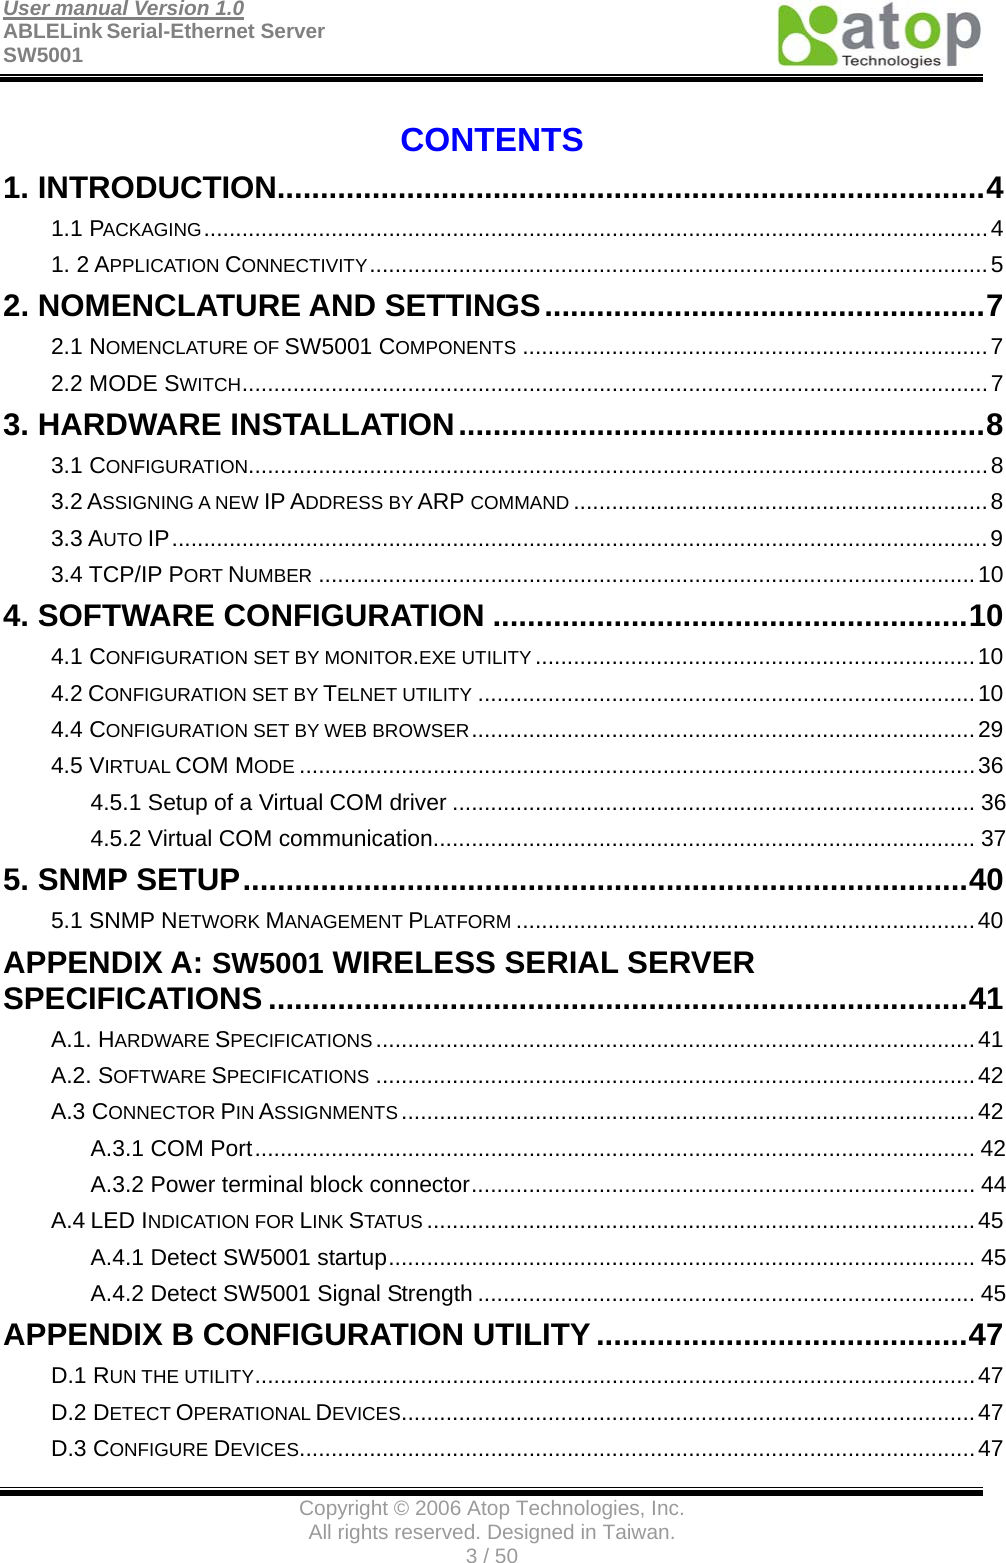 User manual Version 1.0 ABLELink Serial-Ethernet Server   SW5001                                        Copyright © 2006 Atop Technologies, Inc. All rights reserved. Designed in Taiwan. 3 / 50   CONTENTS 1. INTRODUCTION..................................................................................4 1.1 PACKAGING...........................................................................................................................4 1. 2 APPLICATION CONNECTIVITY.................................................................................................5 2. NOMENCLATURE AND SETTINGS...................................................7 2.1 NOMENCLATURE OF SW5001 COMPONENTS .........................................................................7 2.2 MODE SWITCH.....................................................................................................................7 3. HARDWARE INSTALLATION.............................................................8 3.1 CONFIGURATION....................................................................................................................8 3.2 ASSIGNING A NEW IP ADDRESS BY ARP COMMAND .................................................................8 3.3 AUTO IP................................................................................................................................9 3.4 TCP/IP PORT NUMBER .......................................................................................................10 4. SOFTWARE CONFIGURATION .......................................................10 4.1 CONFIGURATION SET BY MONITOR.EXE UTILITY .....................................................................10 4.2 CONFIGURATION SET BY TELNET UTILITY ..............................................................................10 4.4 CONFIGURATION SET BY WEB BROWSER...............................................................................29 4.5 VIRTUAL COM MODE ..........................................................................................................36 4.5.1 Setup of a Virtual COM driver .................................................................................. 36 4.5.2 Virtual COM communication..................................................................................... 37 5. SNMP SETUP....................................................................................40 5.1 SNMP NETWORK MANAGEMENT PLATFORM ........................................................................40 APPENDIX A: SW5001 WIRELESS SERIAL SERVER SPECIFICATIONS .................................................................................41 A.1. HARDWARE SPECIFICATIONS ..............................................................................................41 A.2. SOFTWARE SPECIFICATIONS ..............................................................................................42 A.3 CONNECTOR PIN ASSIGNMENTS ..........................................................................................42 A.3.1 COM Port................................................................................................................. 42 A.3.2 Power terminal block connector............................................................................... 44 A.4 LED INDICATION FOR LINK STATUS ......................................................................................45 A.4.1 Detect SW5001 startup............................................................................................ 45 A.4.2 Detect SW5001 Signal Strength .............................................................................. 45 APPENDIX B CONFIGURATION UTILITY ...........................................47 D.1 RUN THE UTILITY.................................................................................................................47 D.2 DETECT OPERATIONAL DEVICES..........................................................................................47 D.3 CONFIGURE DEVICES..........................................................................................................47 